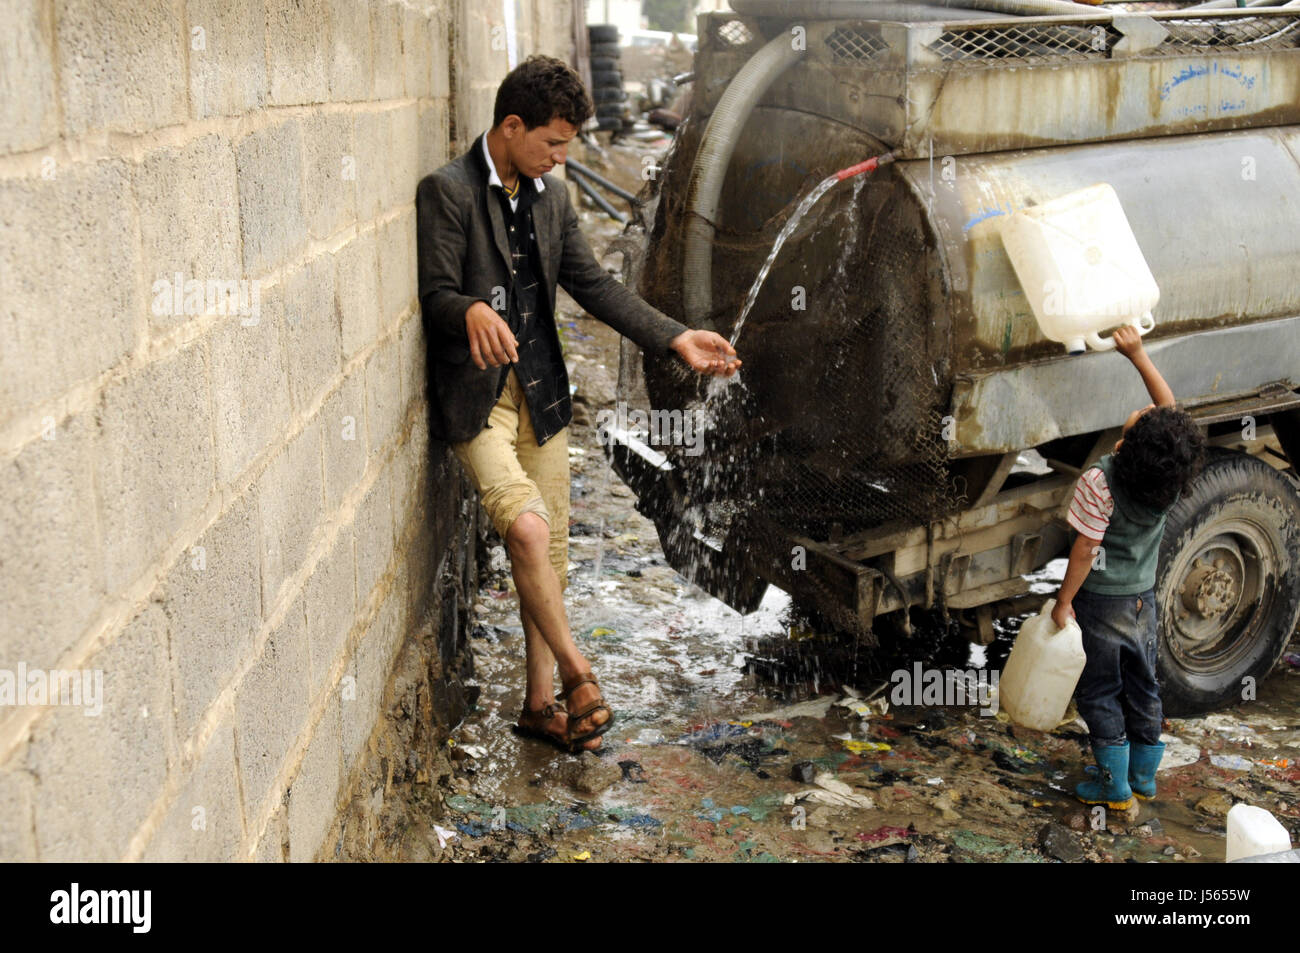 Sanaa, Yemen. 16th May, 2017. People wait to collect clean water from a charity water pump as a man fills his water tanker in Sanaa, Yemen on May 16, 2017. Contaminated water is a reason causing the cholera disease in Yemen. Credit: Mohammed Mohammed/Xinhua/Alamy Live News Stock Photo